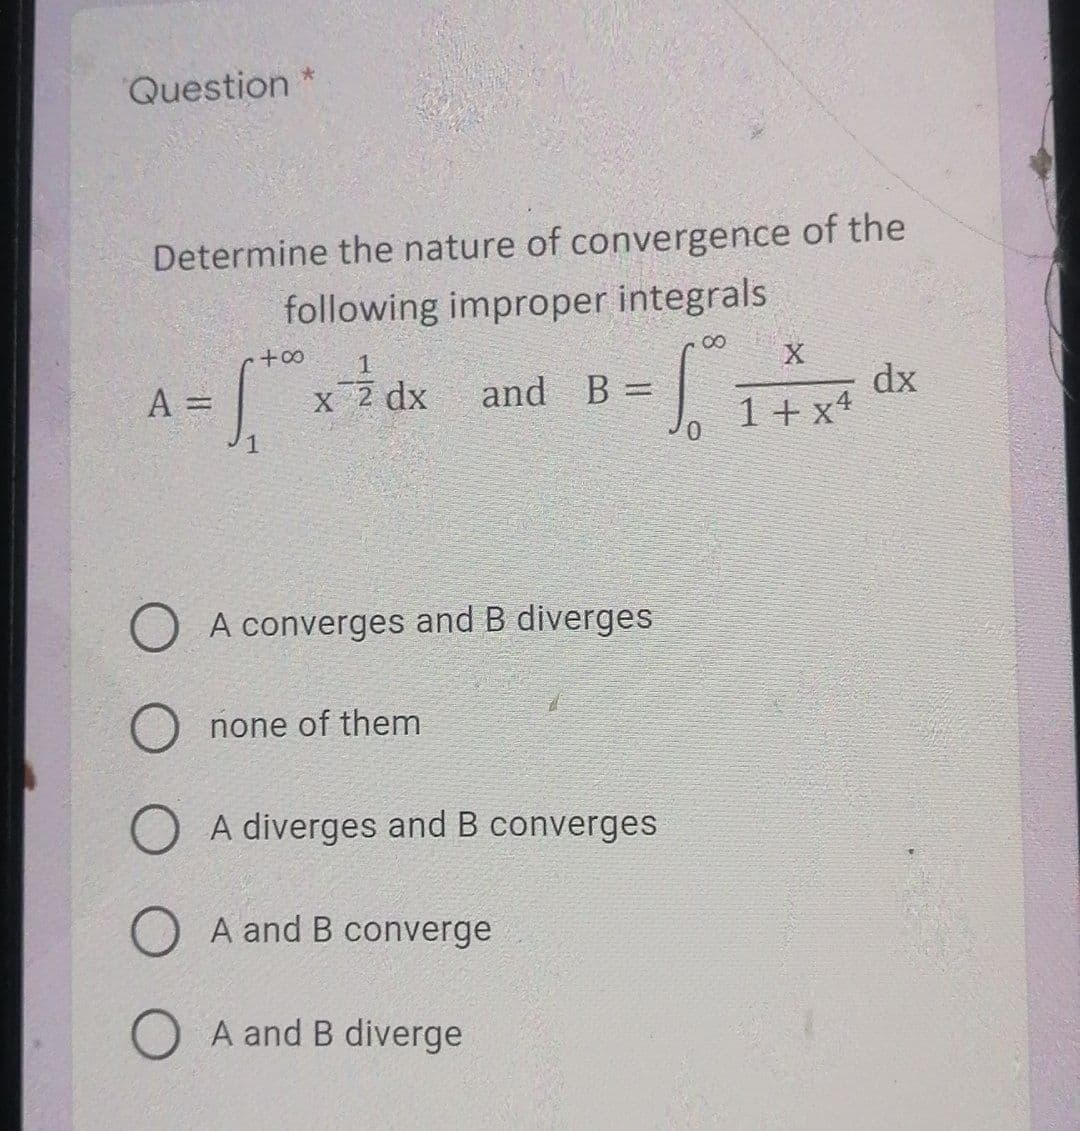 Question *
Determine the nature of convergence of the
following improper integrals
00
X
dx
1+ x+
A =
and B =
%3D
%3D
O A converges and B diverges
none of them
A diverges and B converges
O A and B converge
O A and B diverge
